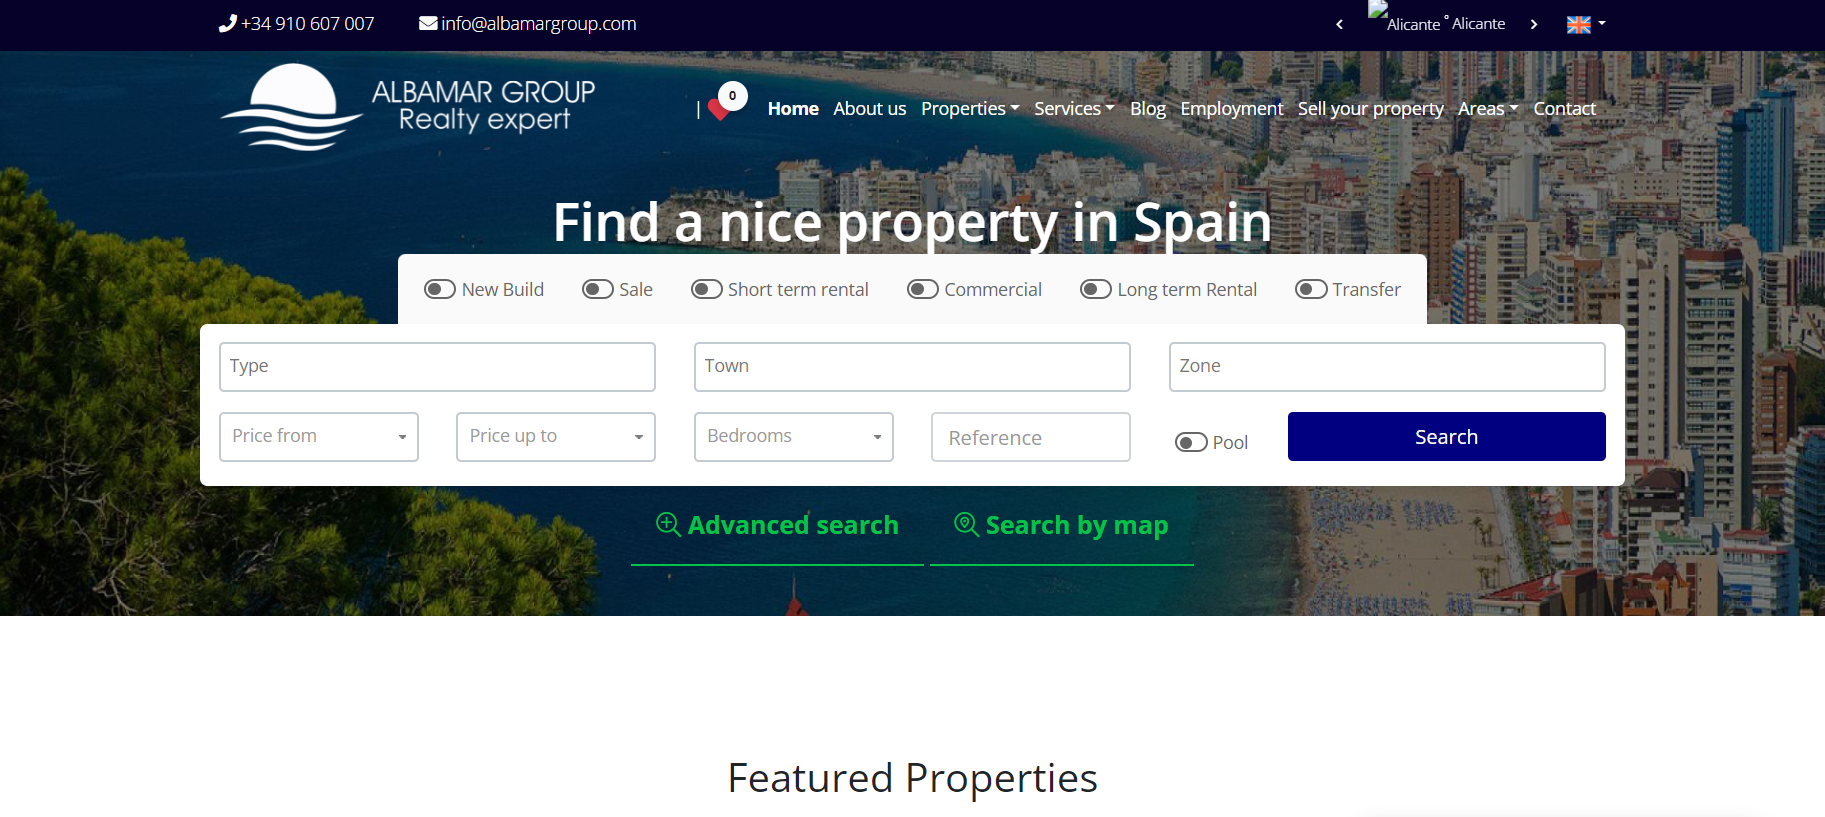 ALBAMAR Group: The Reality of Dealing with a Real Estate Agency in Spain